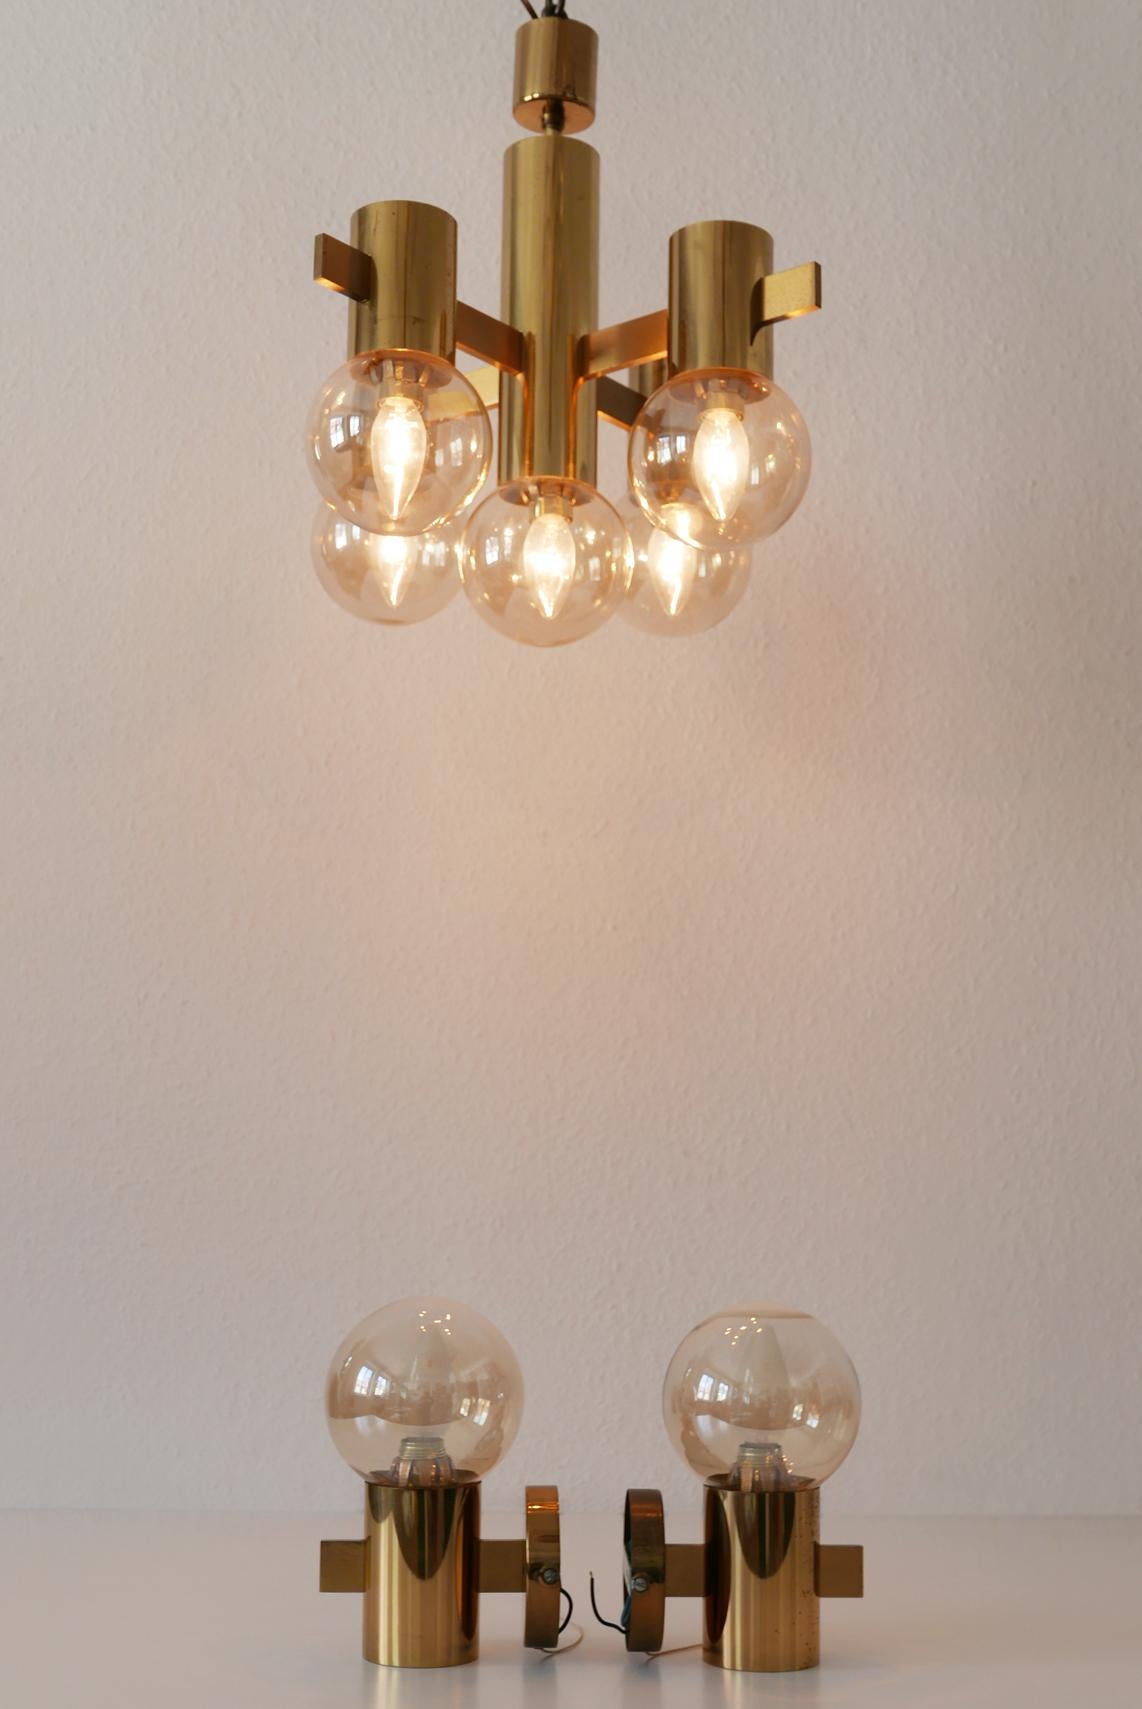 Set of elegant Mid-Century Modern chandelier and wall lamps. Designed probably by Hans-Agne Jakobsson for Markaryd, Sweden in 1960s.

Executed in massive brass. The chandelier needs 5 x and each wall lamp 1 x E14 Edison screw fit bulb.They are